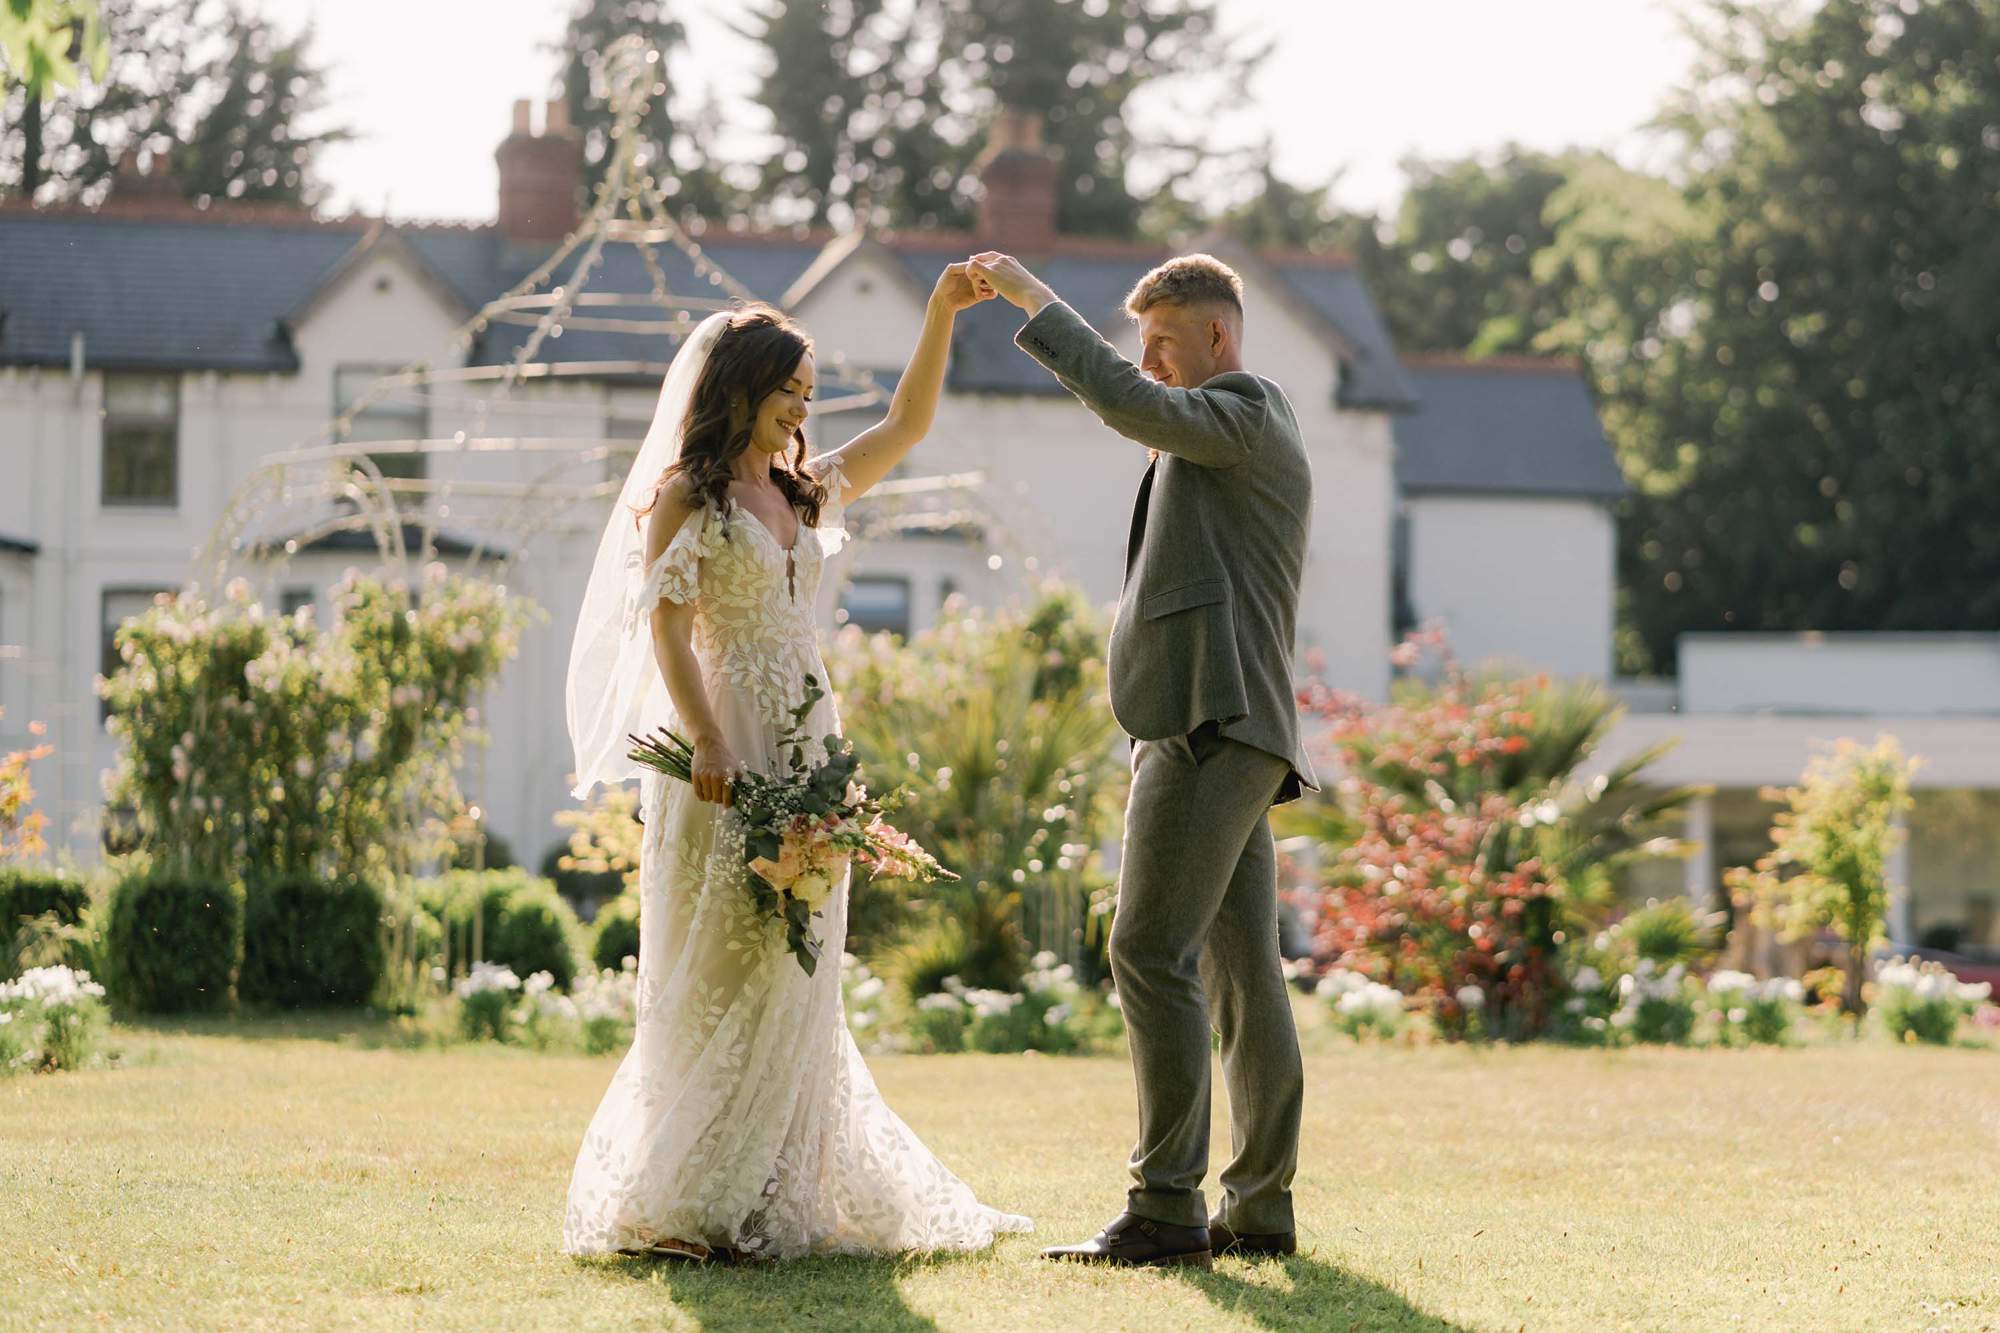 Bride and groom practice their first dance together on their wedding day with the Southdowns Manor hotel as the backdrop.